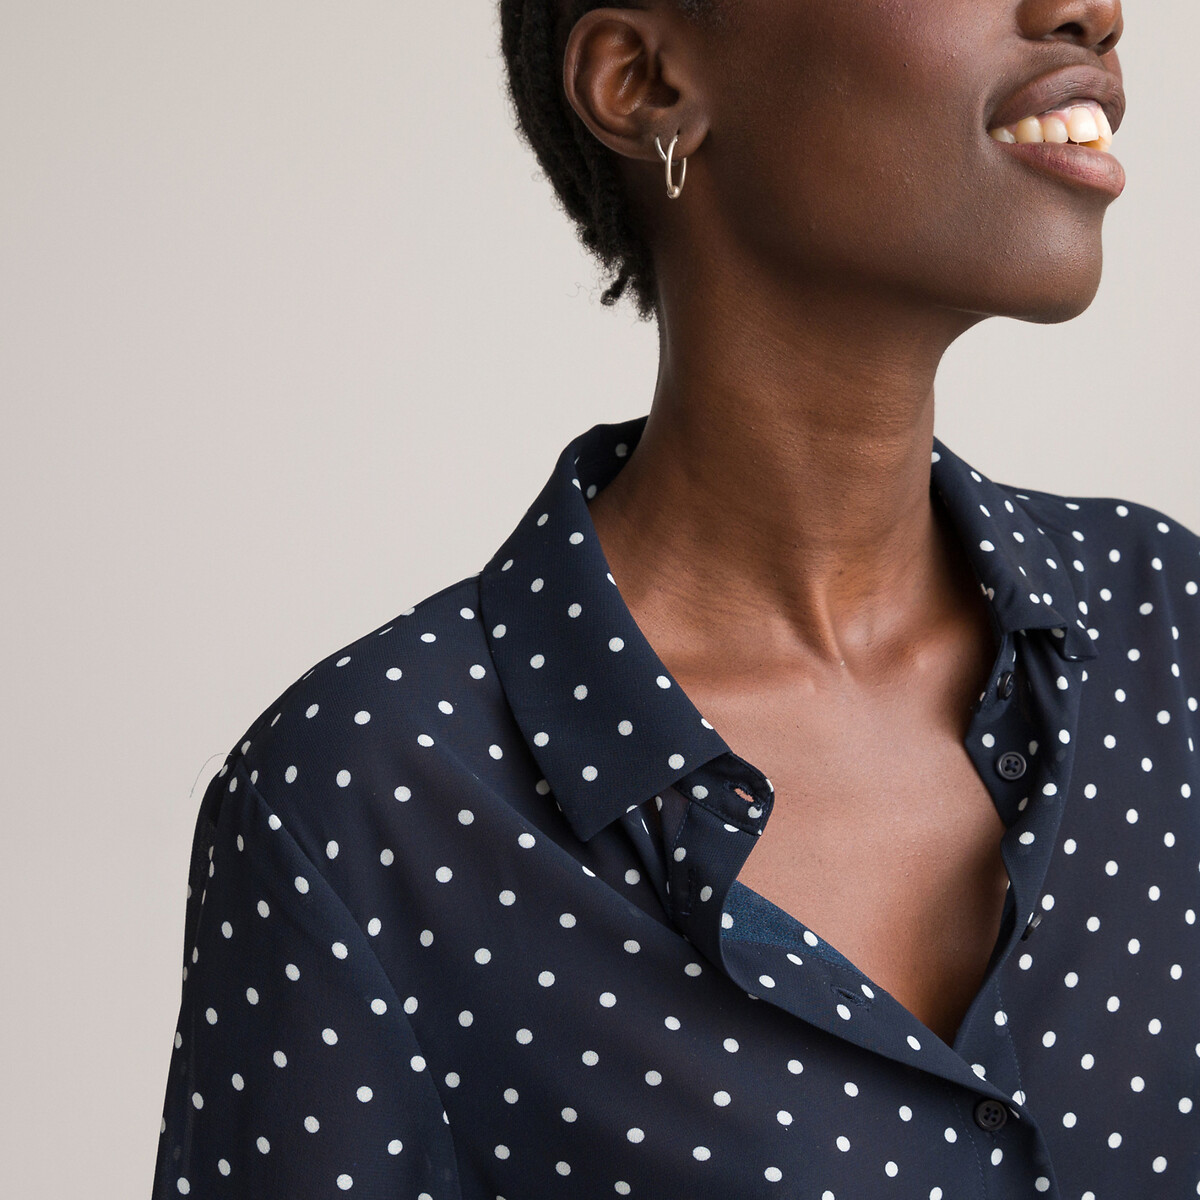 Recycled polka dot shirt with long sleeves La Redoute Collections